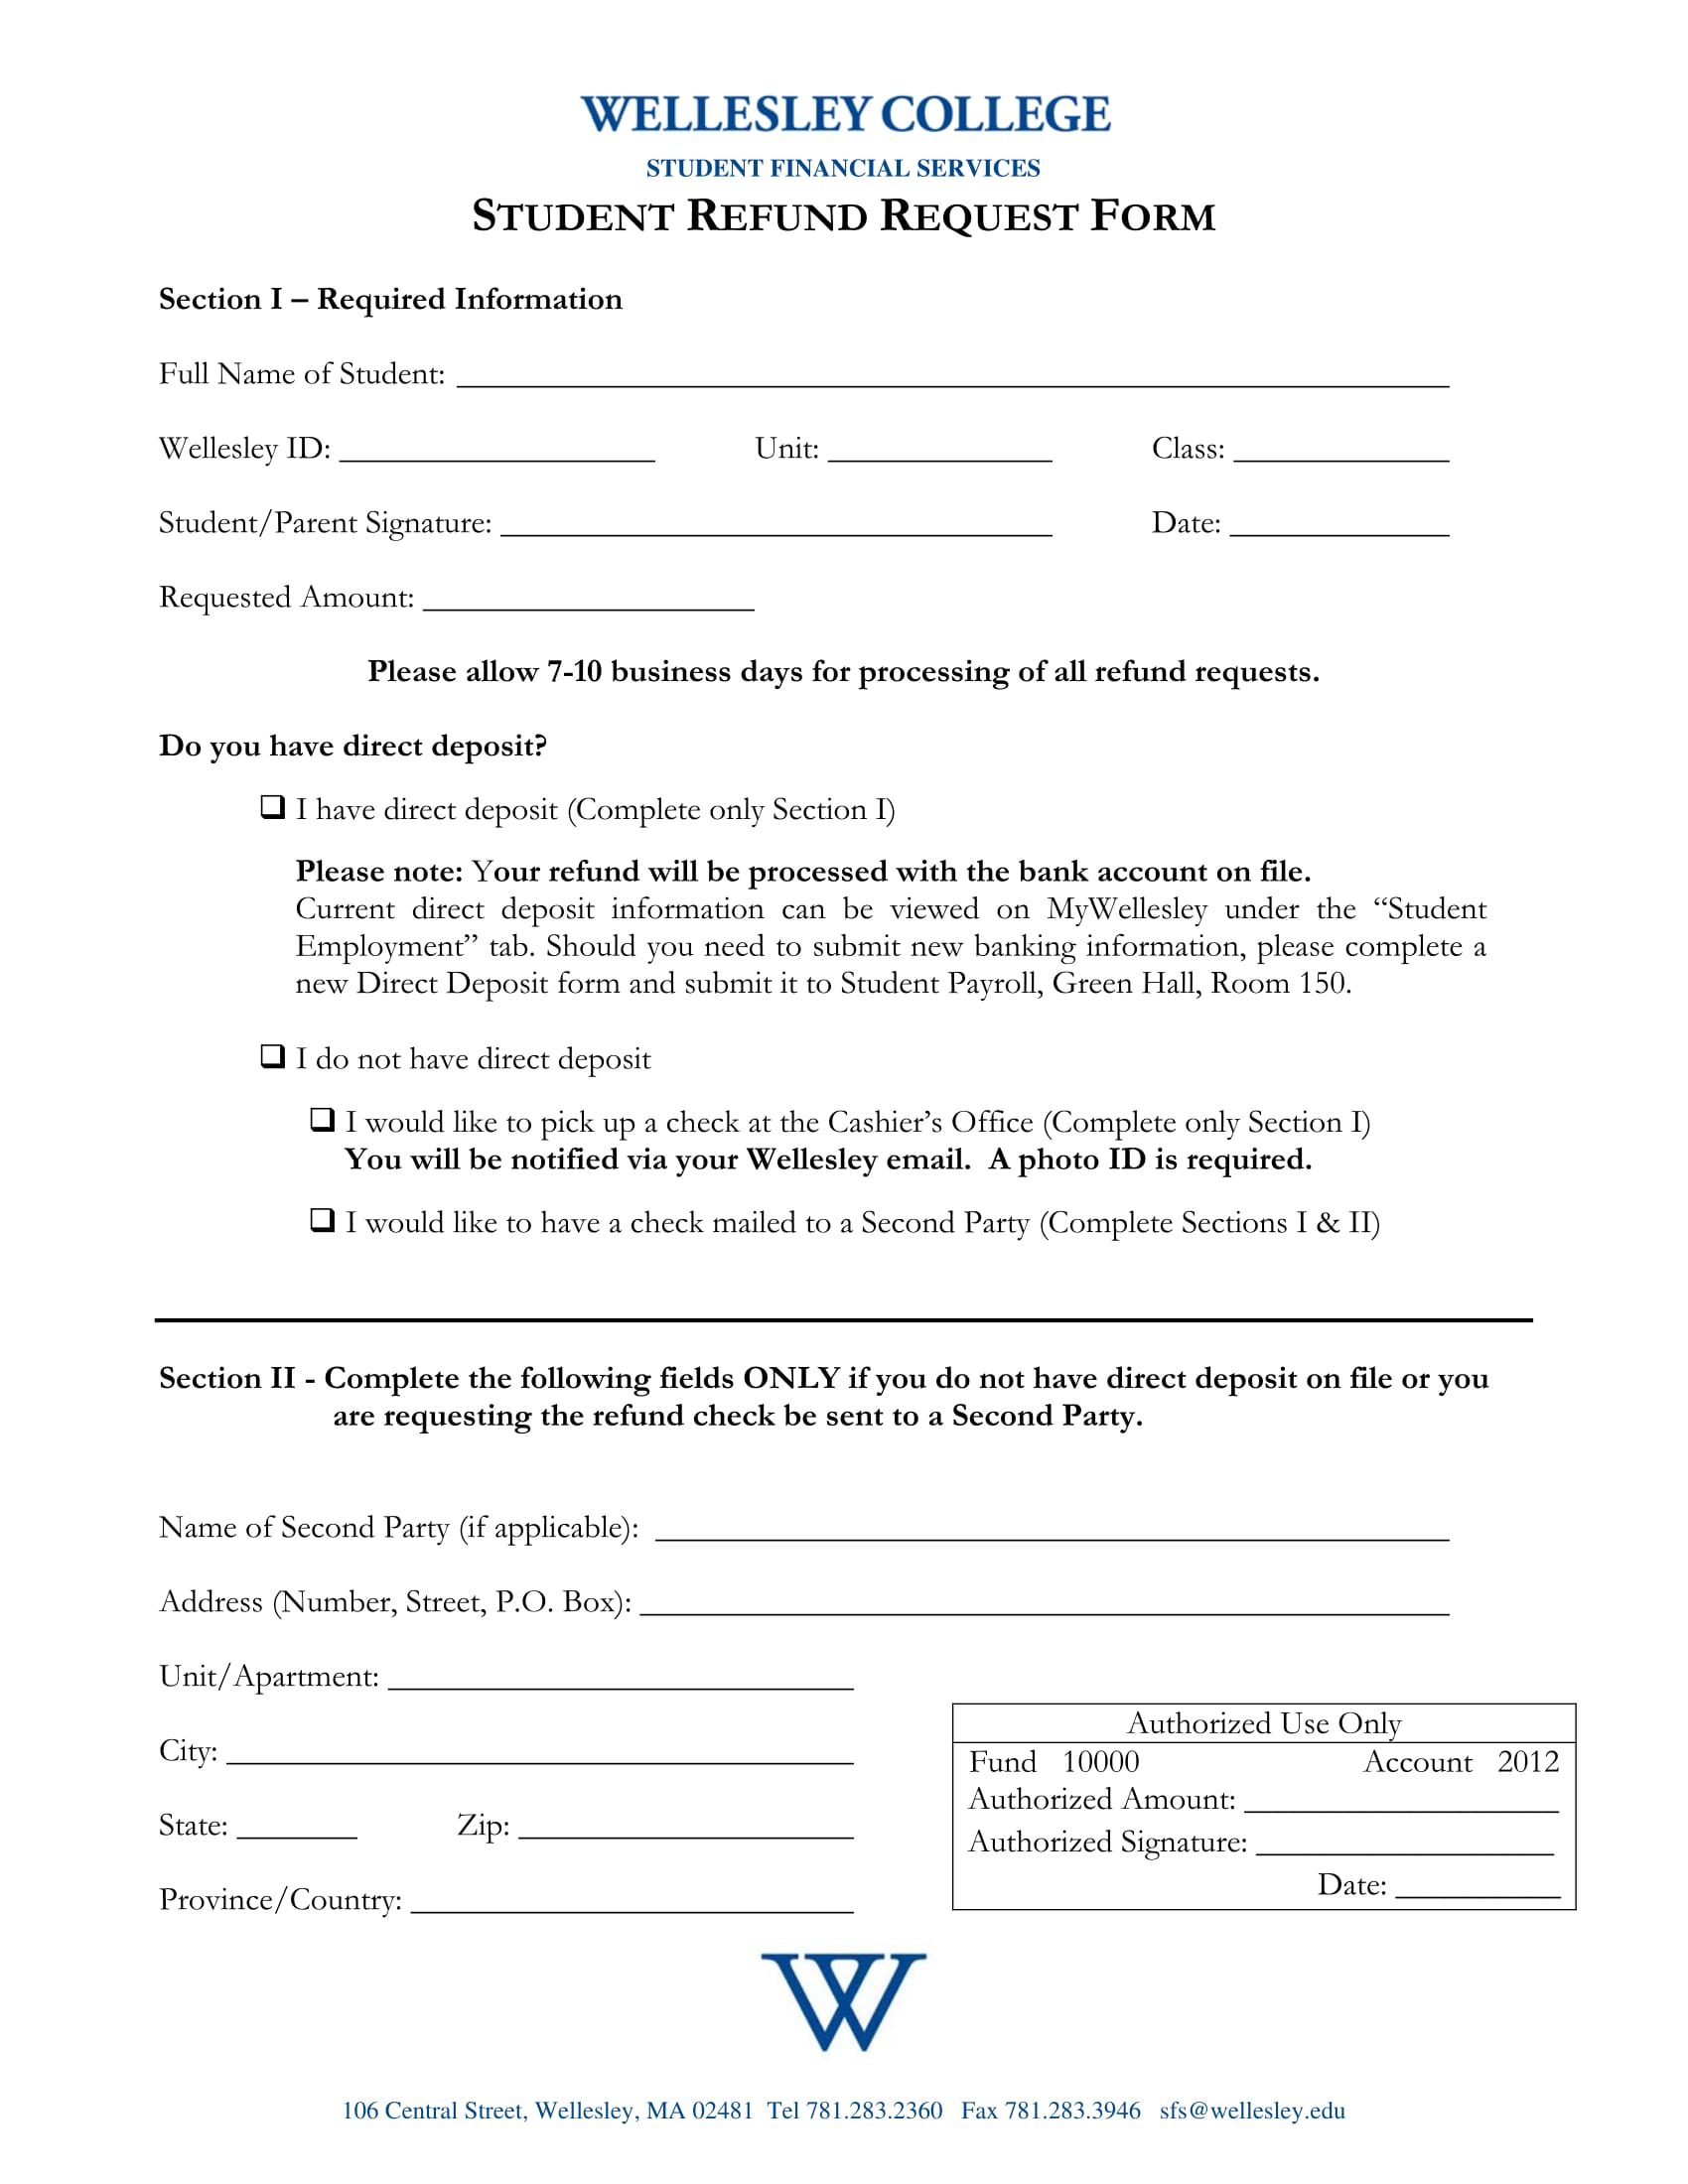 fillable student refund request form 1